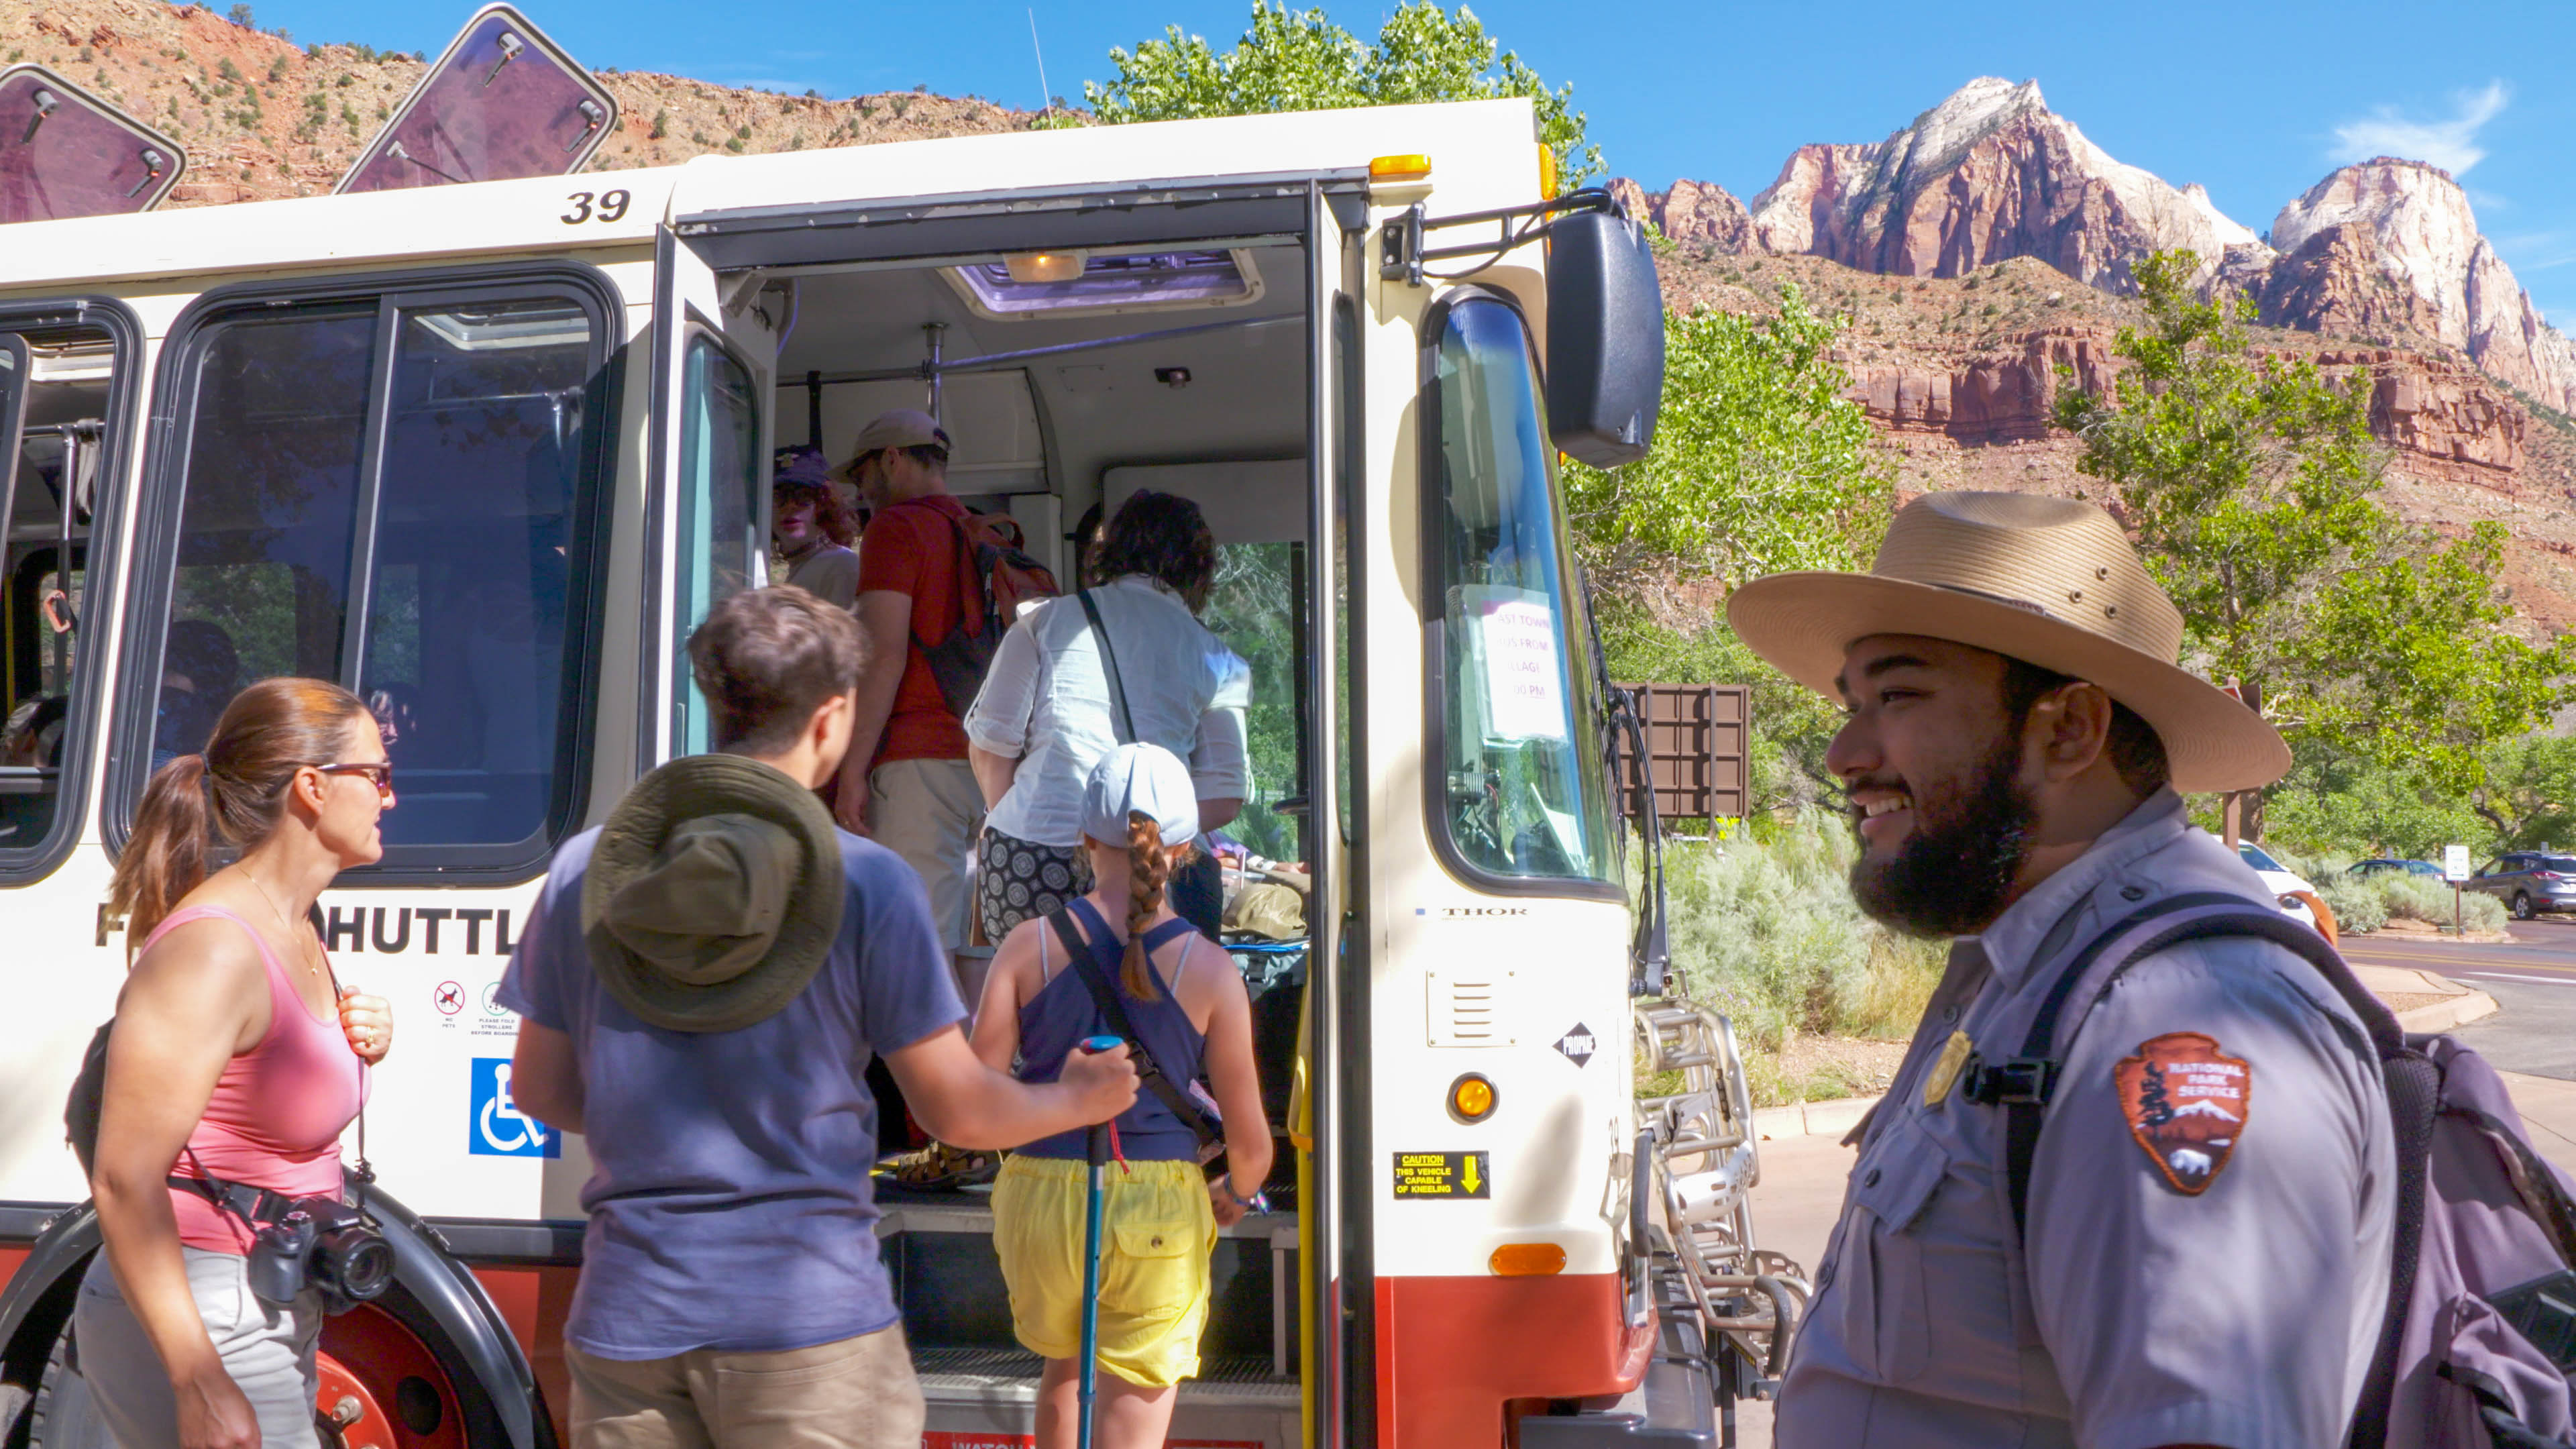 A ranger smiles as visitors board a Zion Cayon shuttle, with sandstone cliffs in the background